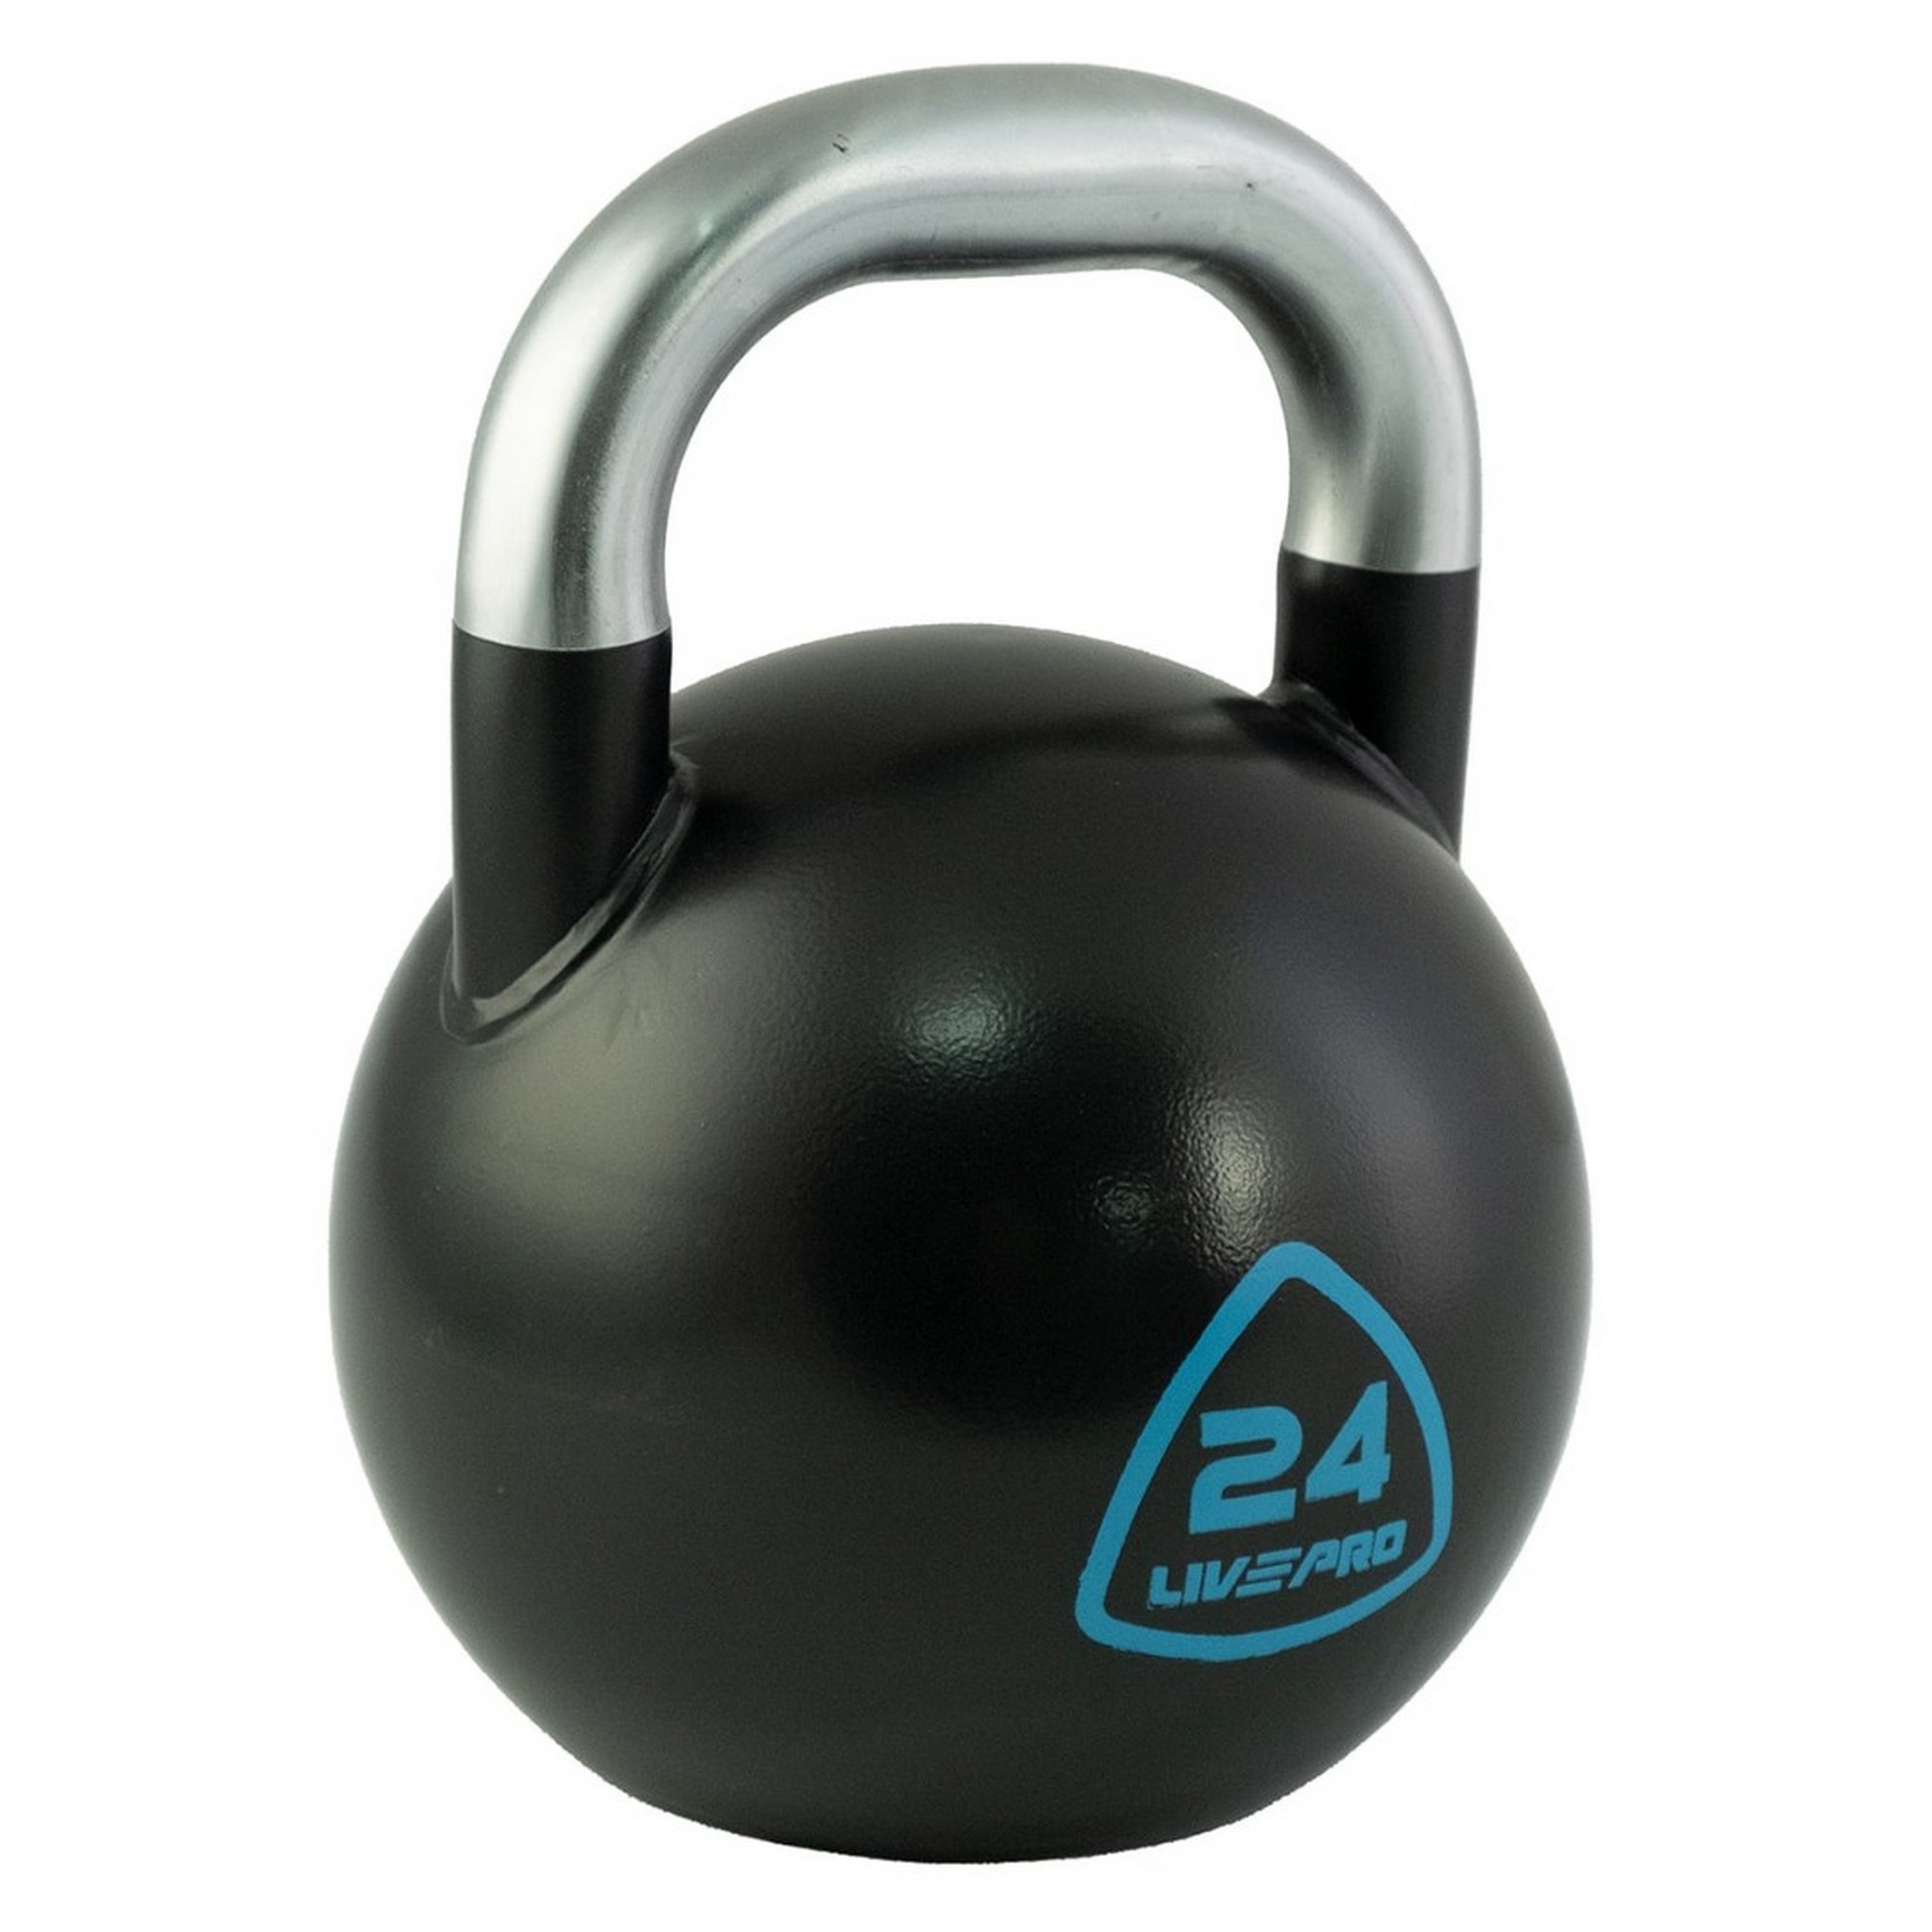   28  Live Pro Steel Competition Kettlebell LP8042-28